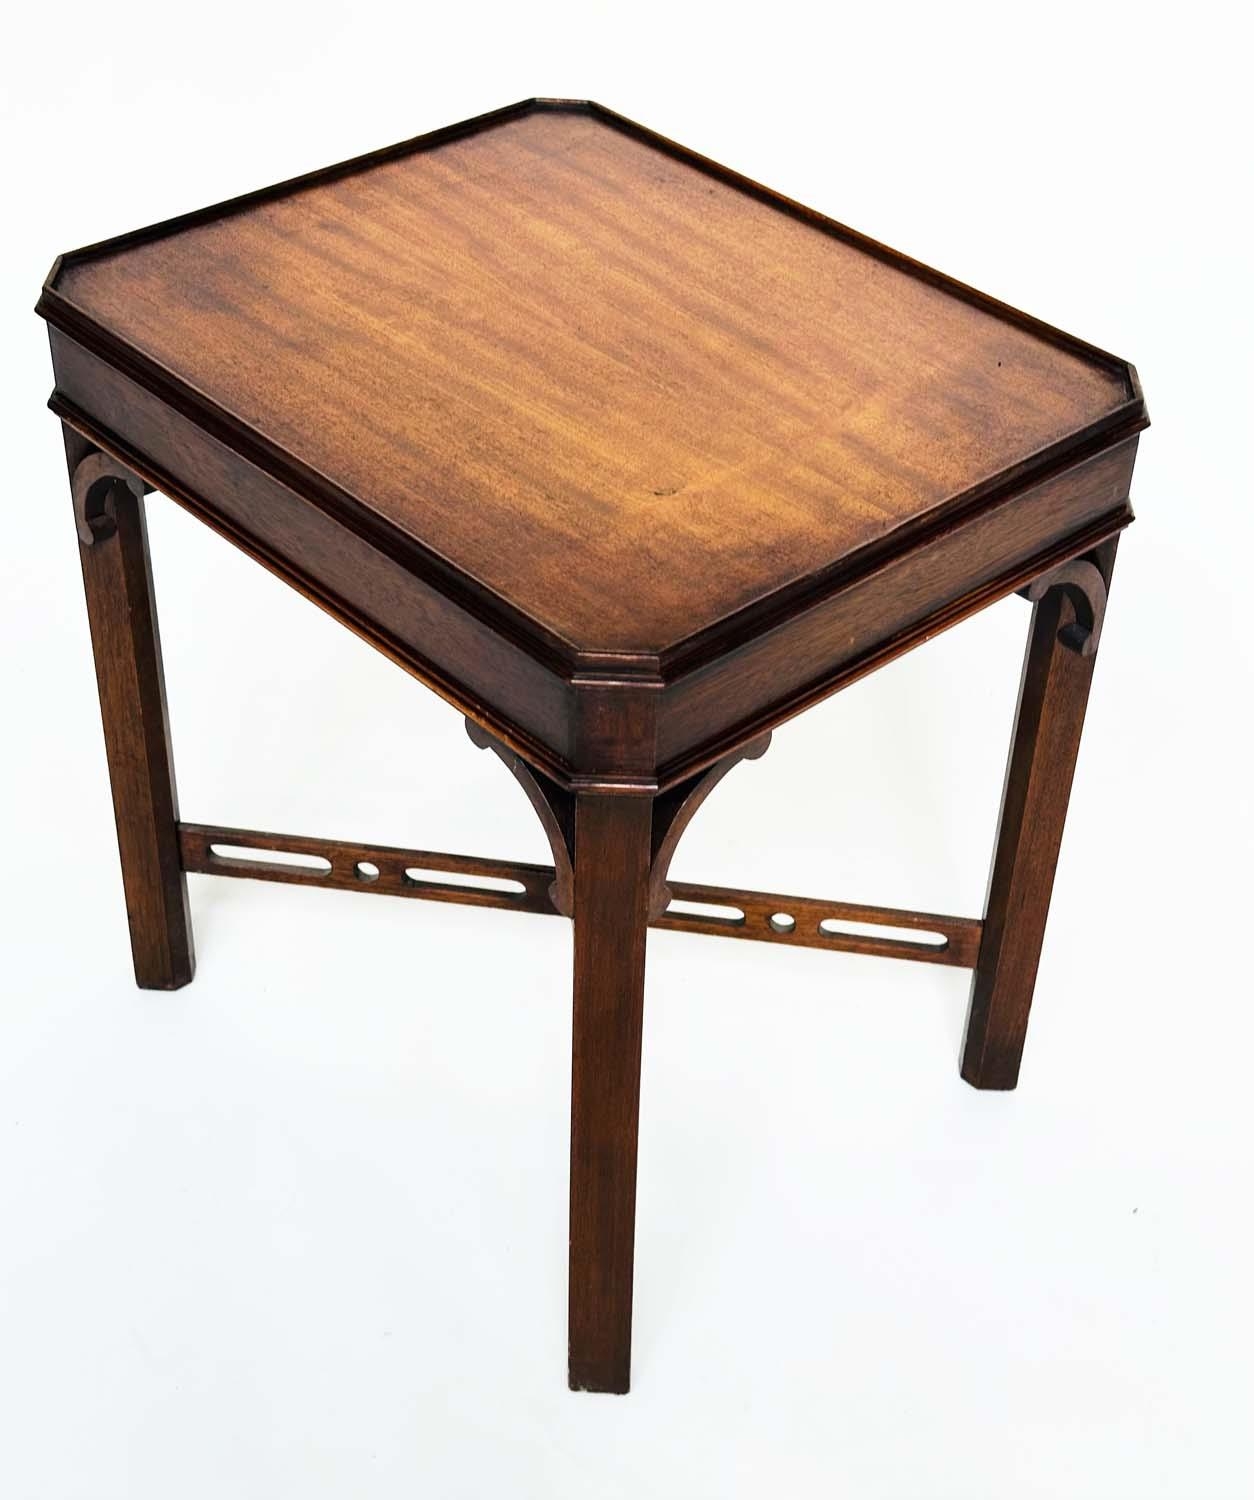 LAMP TABLES, a pair, George III design mahogany each with canted corners and pierced 'X' stretchers, - Image 7 of 9